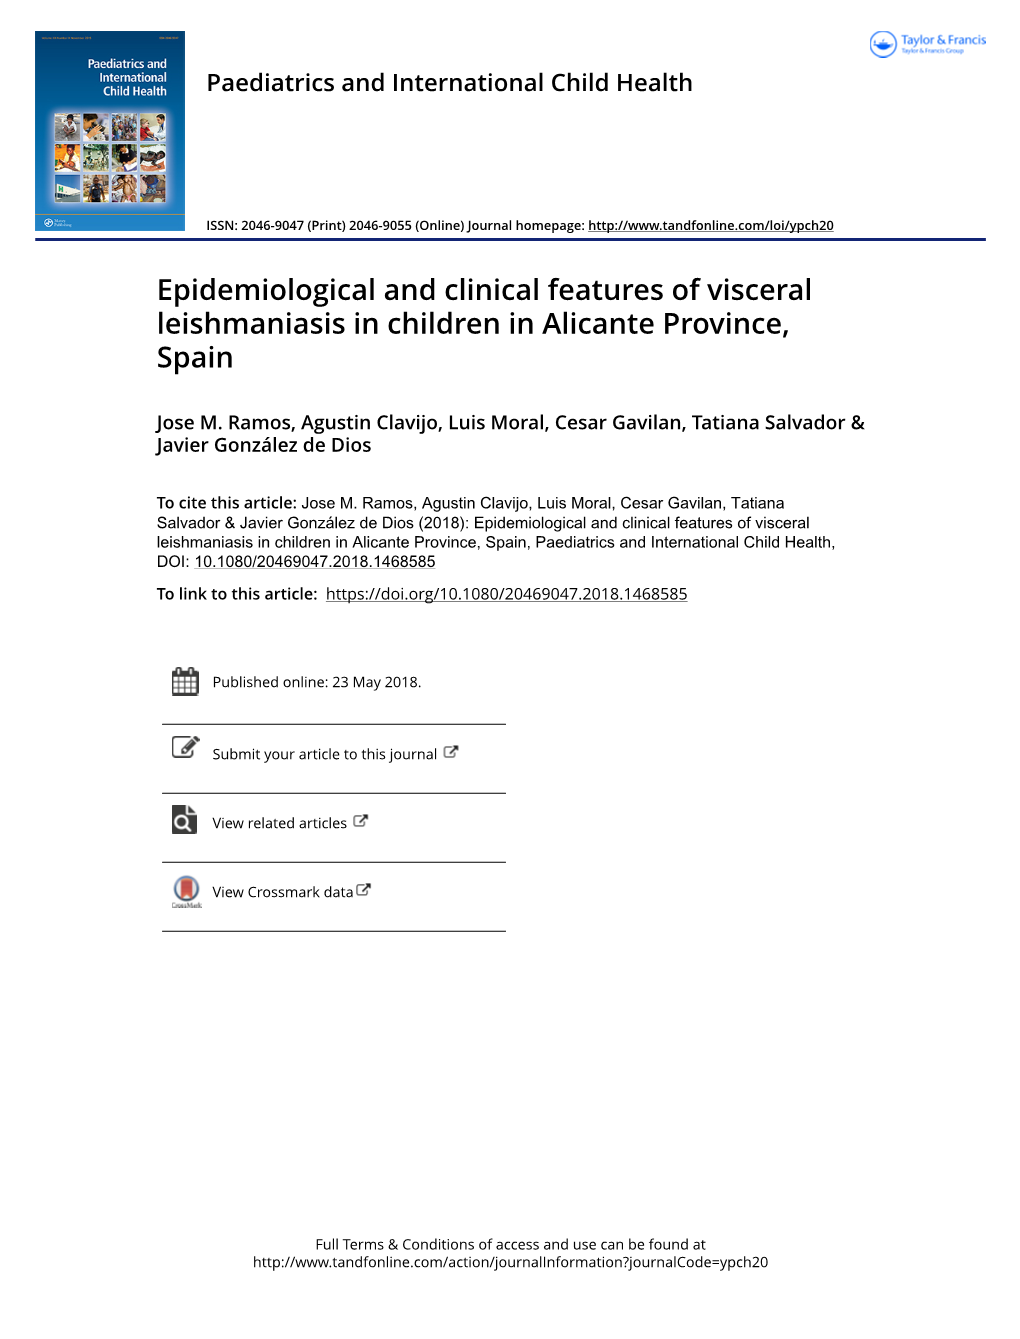 Epidemiological and Clinical Features of Visceral Leishmaniasis in Children in Alicante Province, Spain